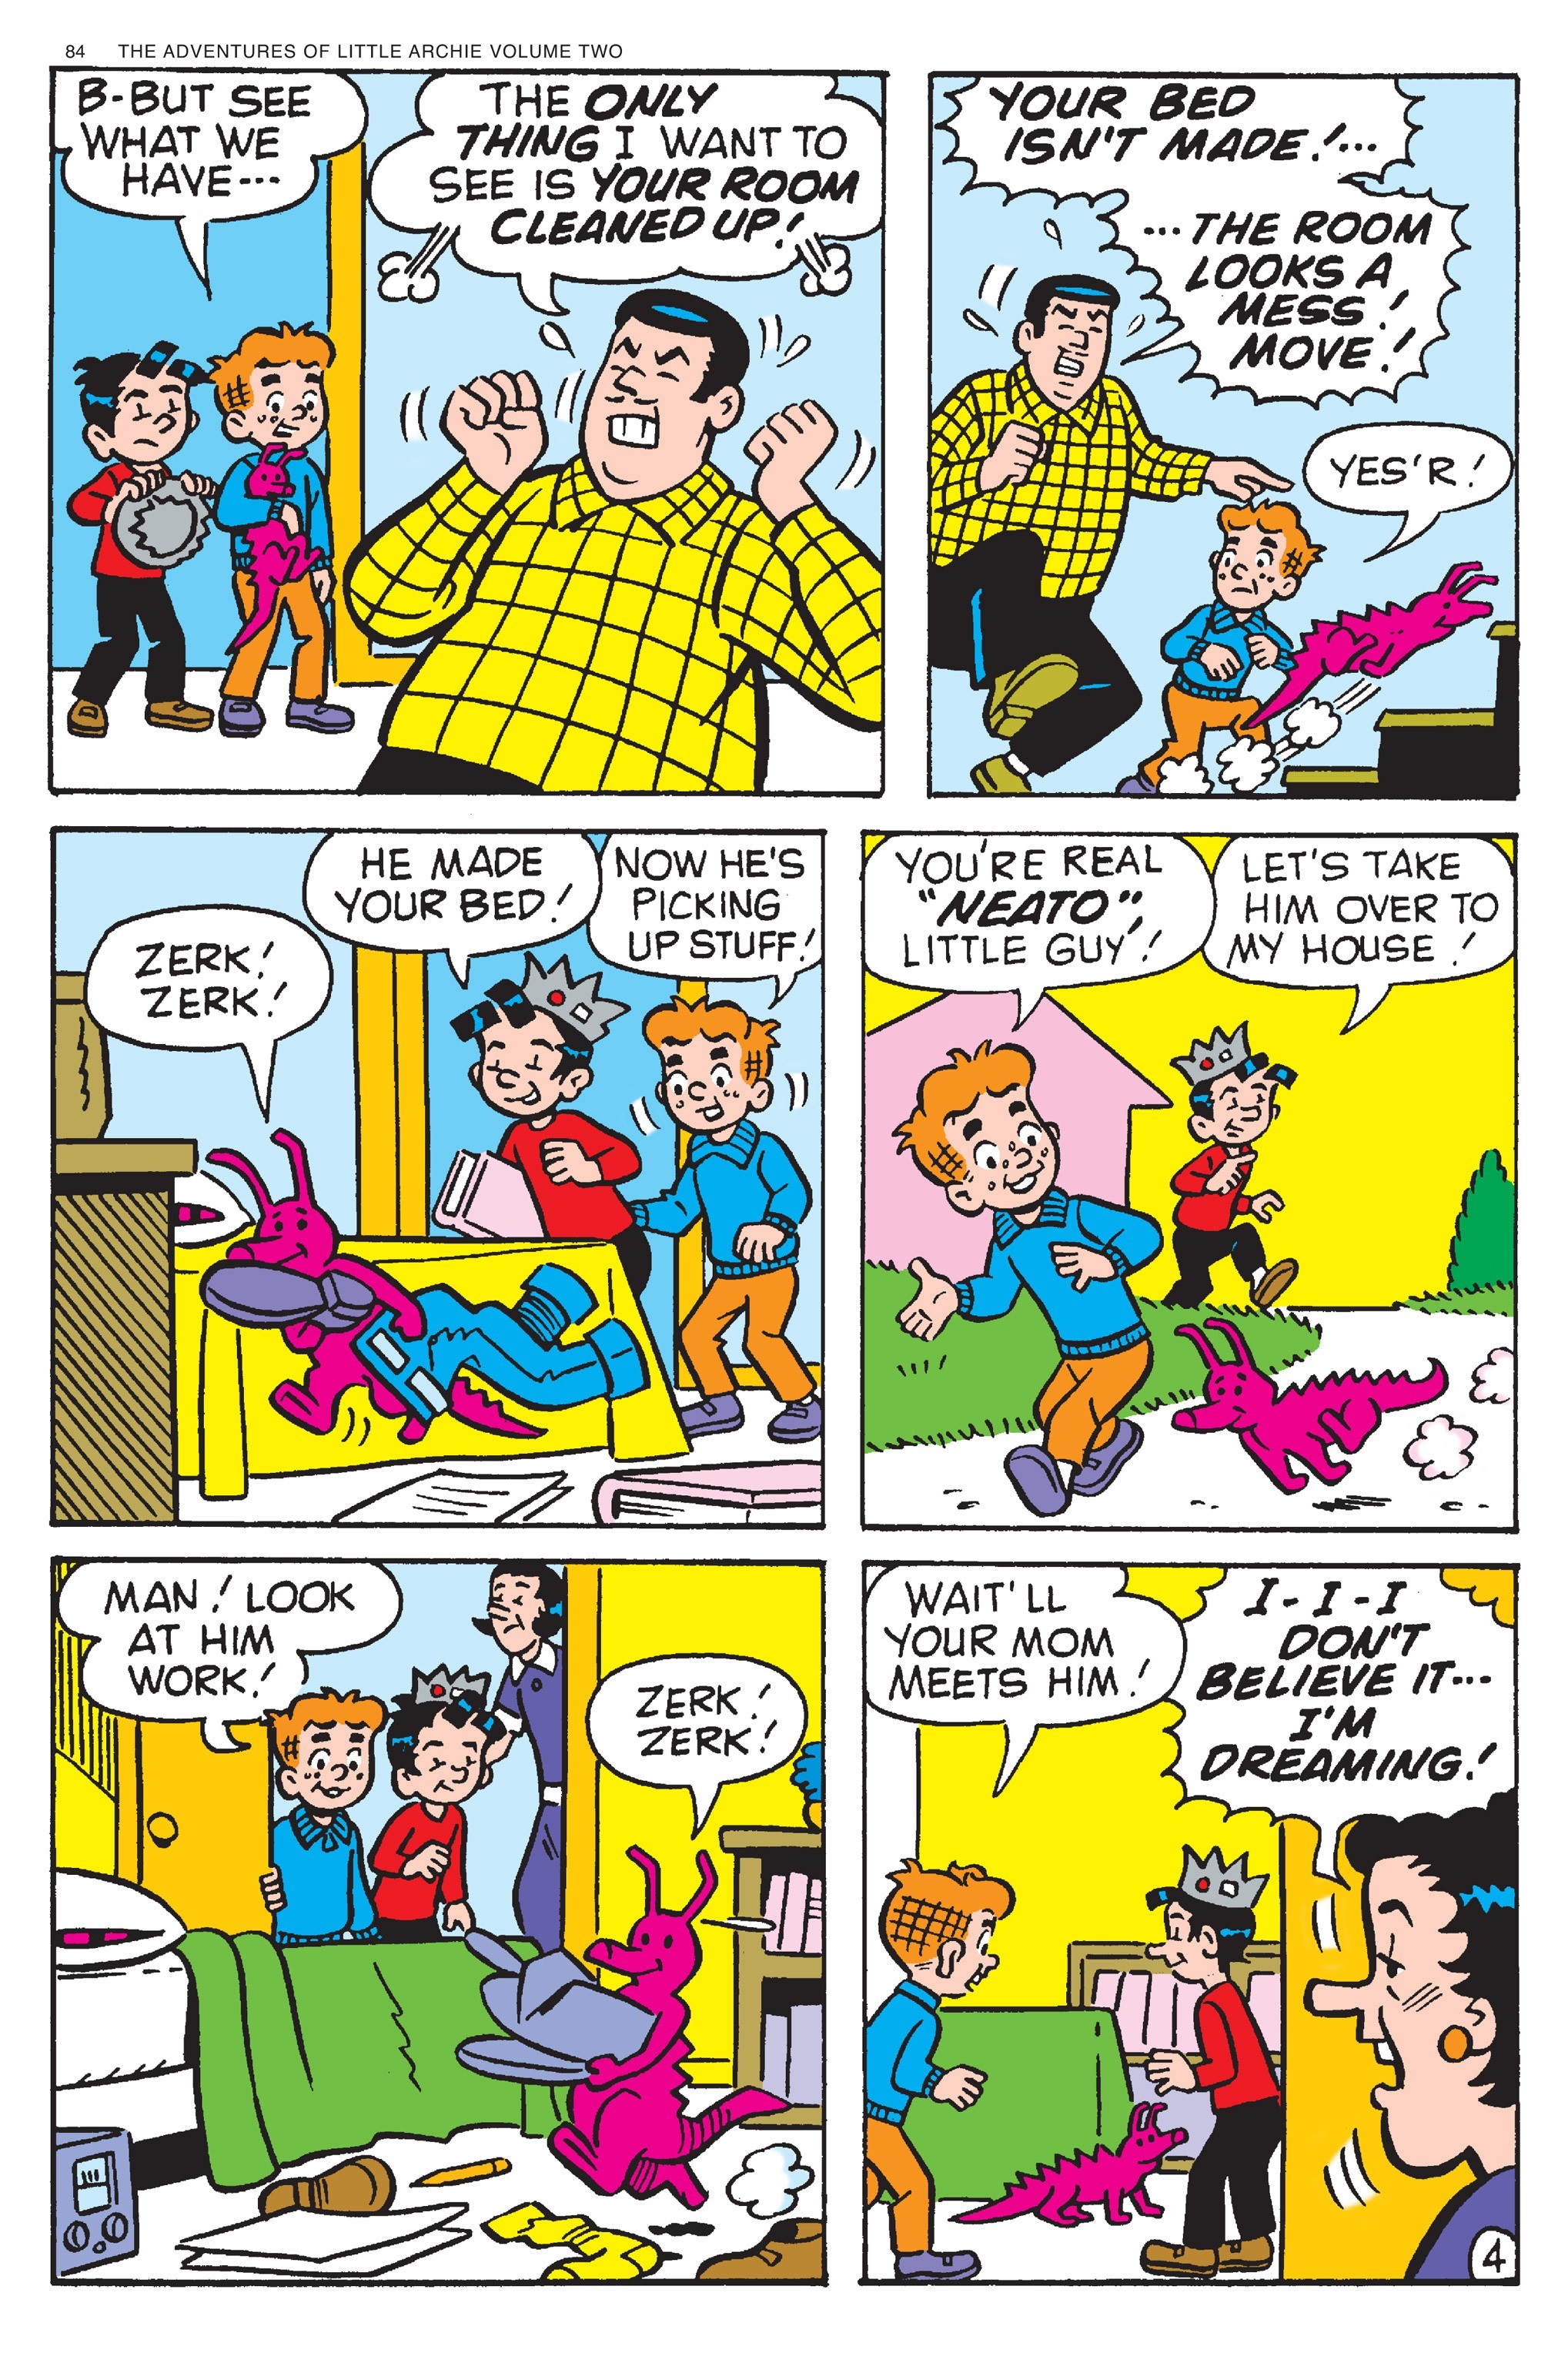 Read online Adventures of Little Archie comic -  Issue # TPB 2 - 85